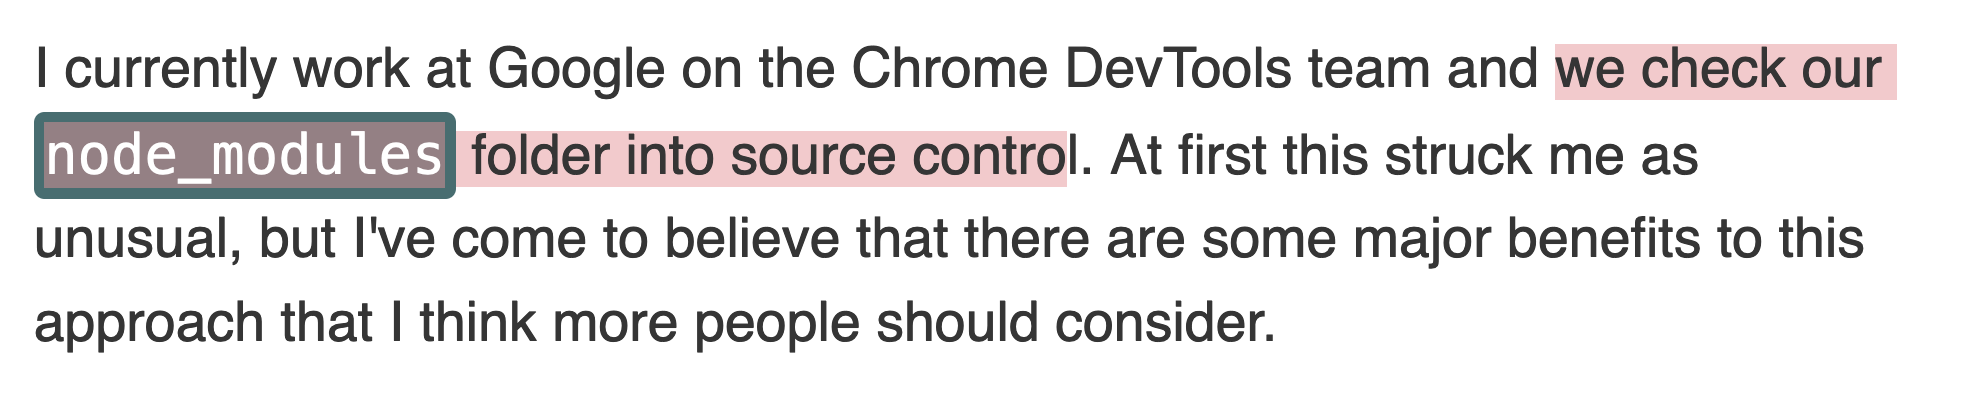 I currently work at Google on the Chrome DevTools team and we check our node_modules folder into source control. At first this struck me as unusual, but I've come to believe that there are some major benefits to this approach that I think more people should consider.